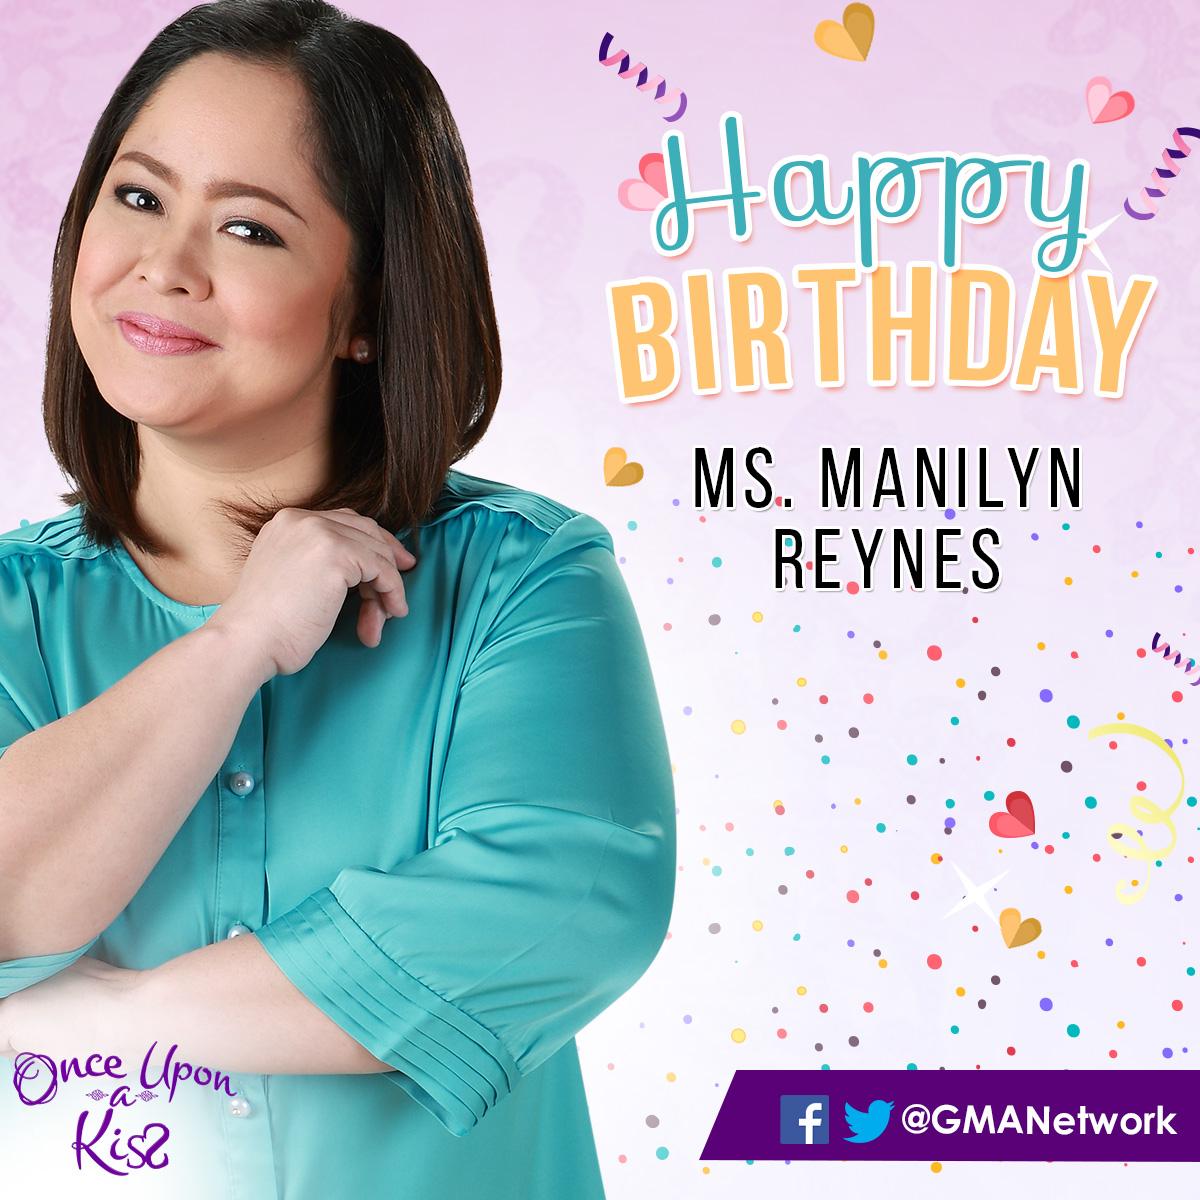 \" Happy birthday, Ms. Manilyn Reynes! Much love from your OUAK family! :) 